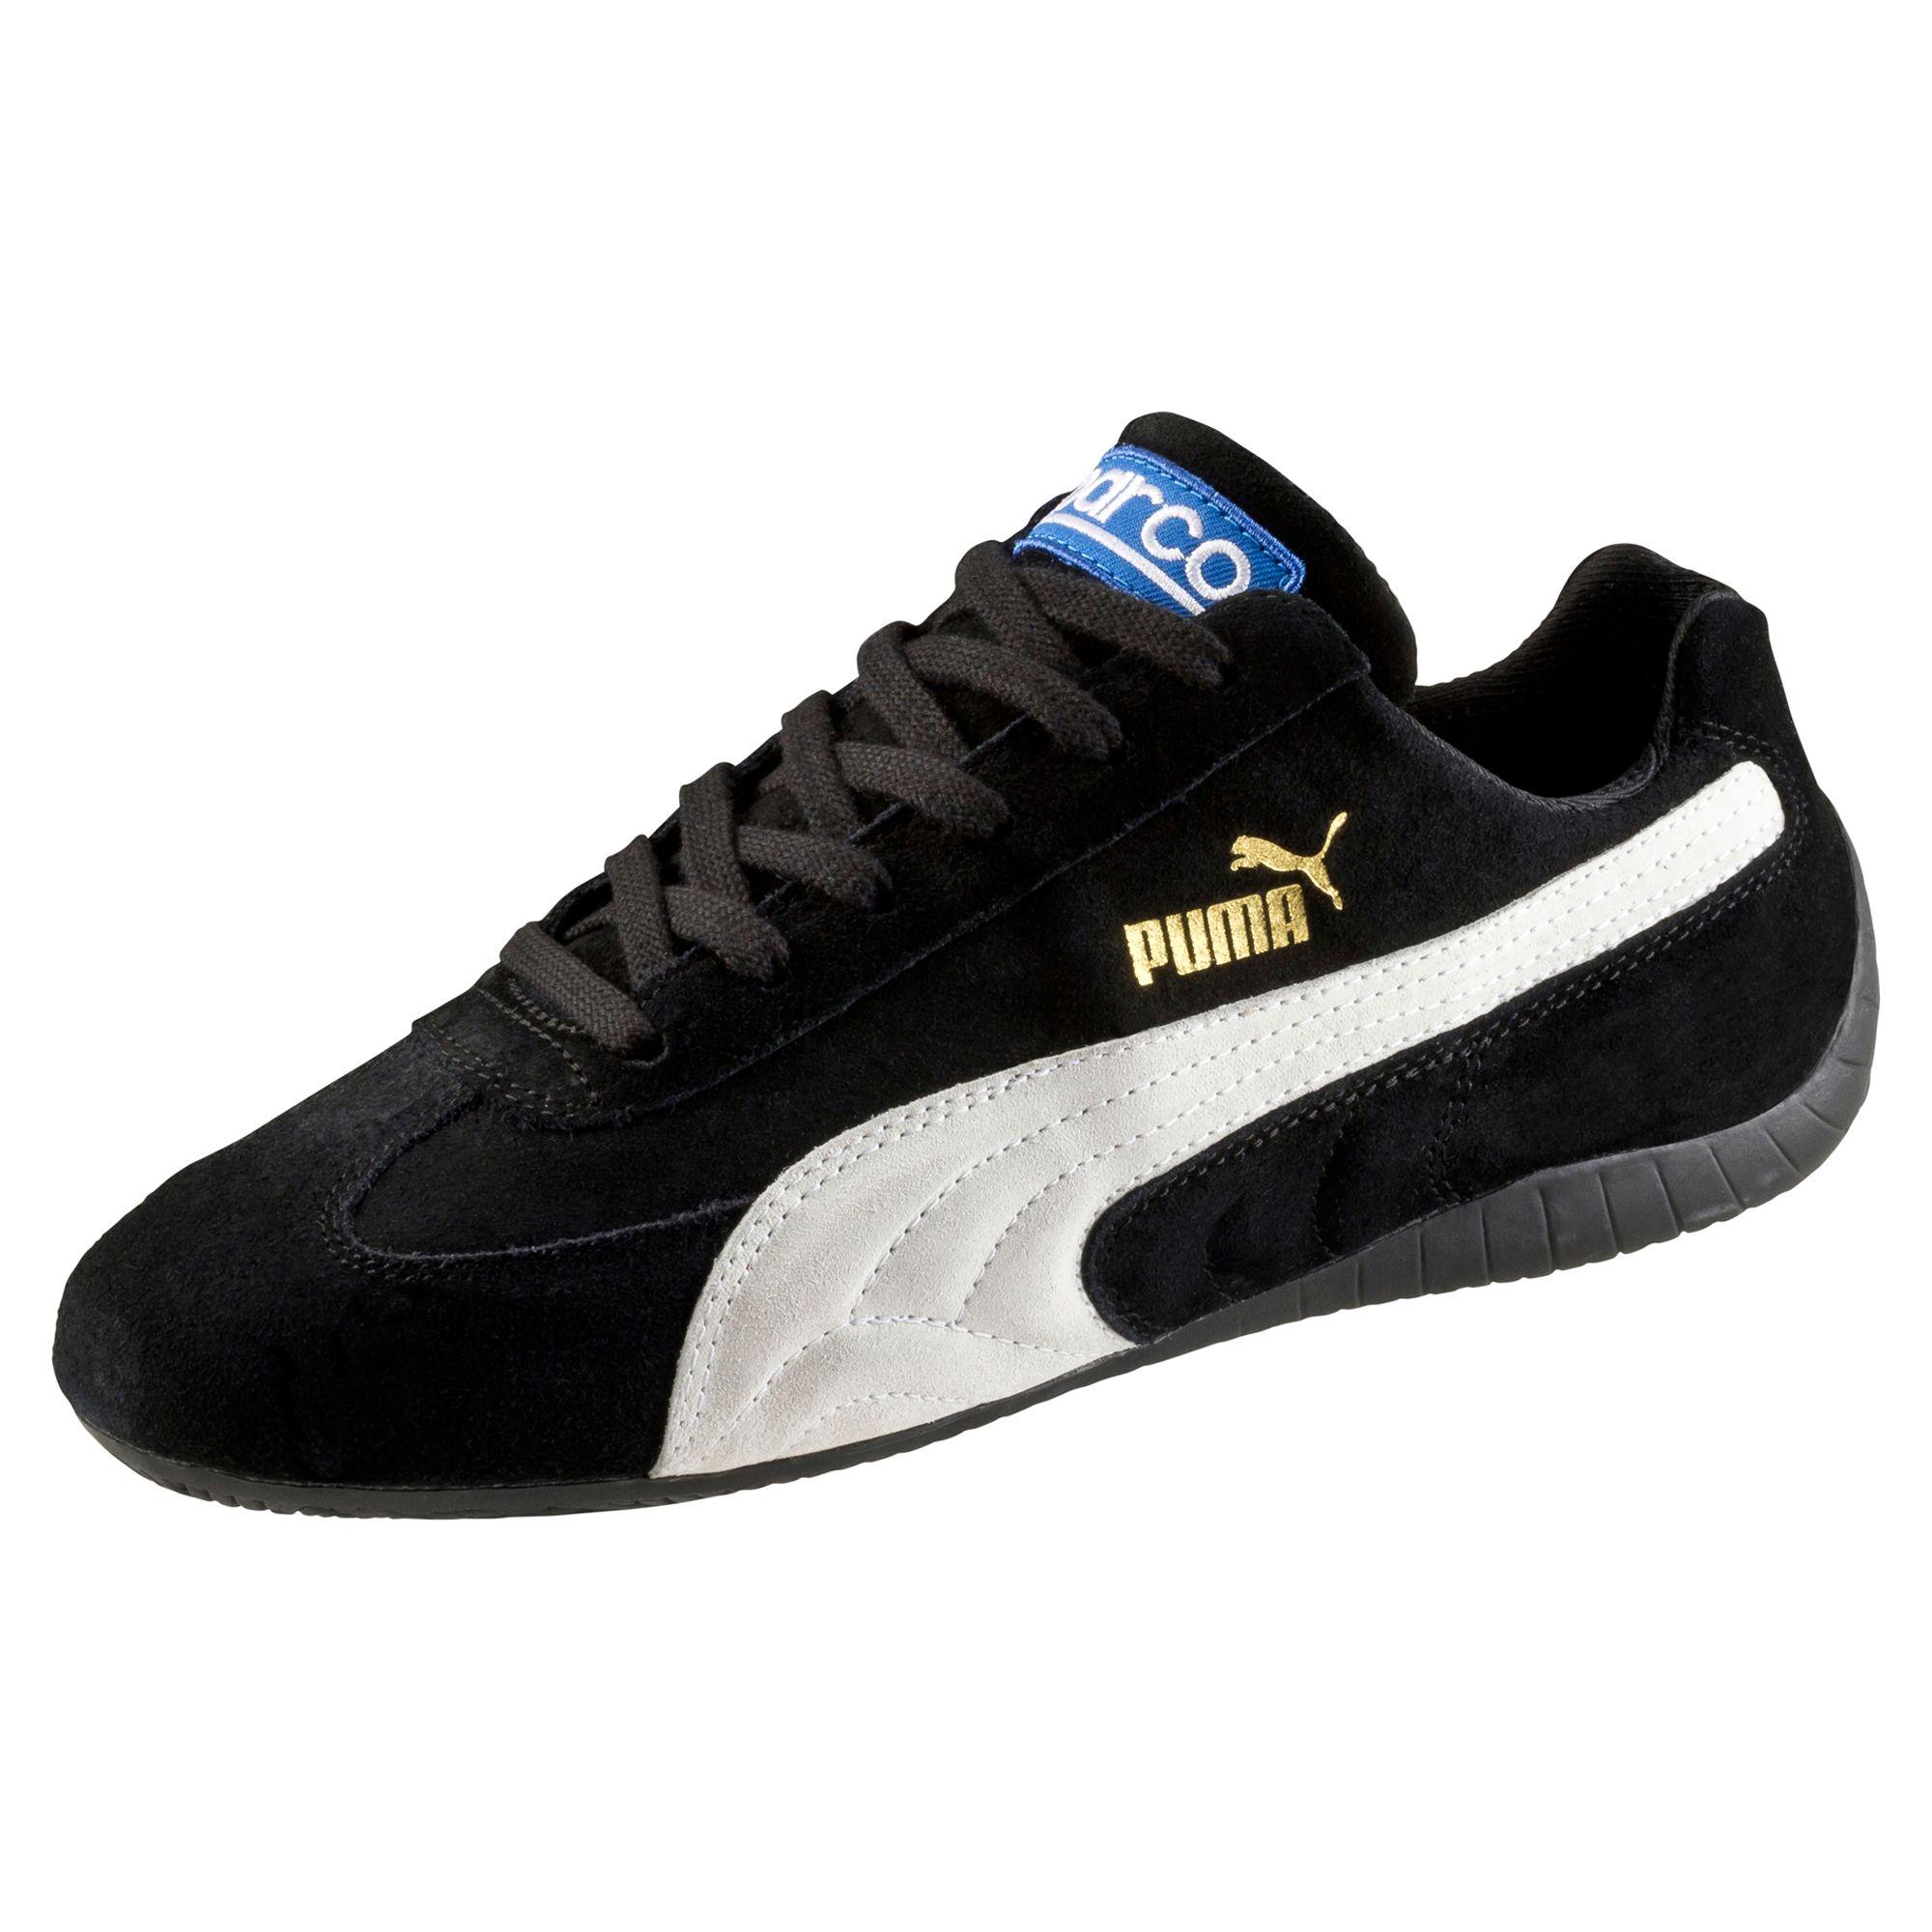 Lyst - PUMA Speed Cat Sparco Shoes in Black for Men